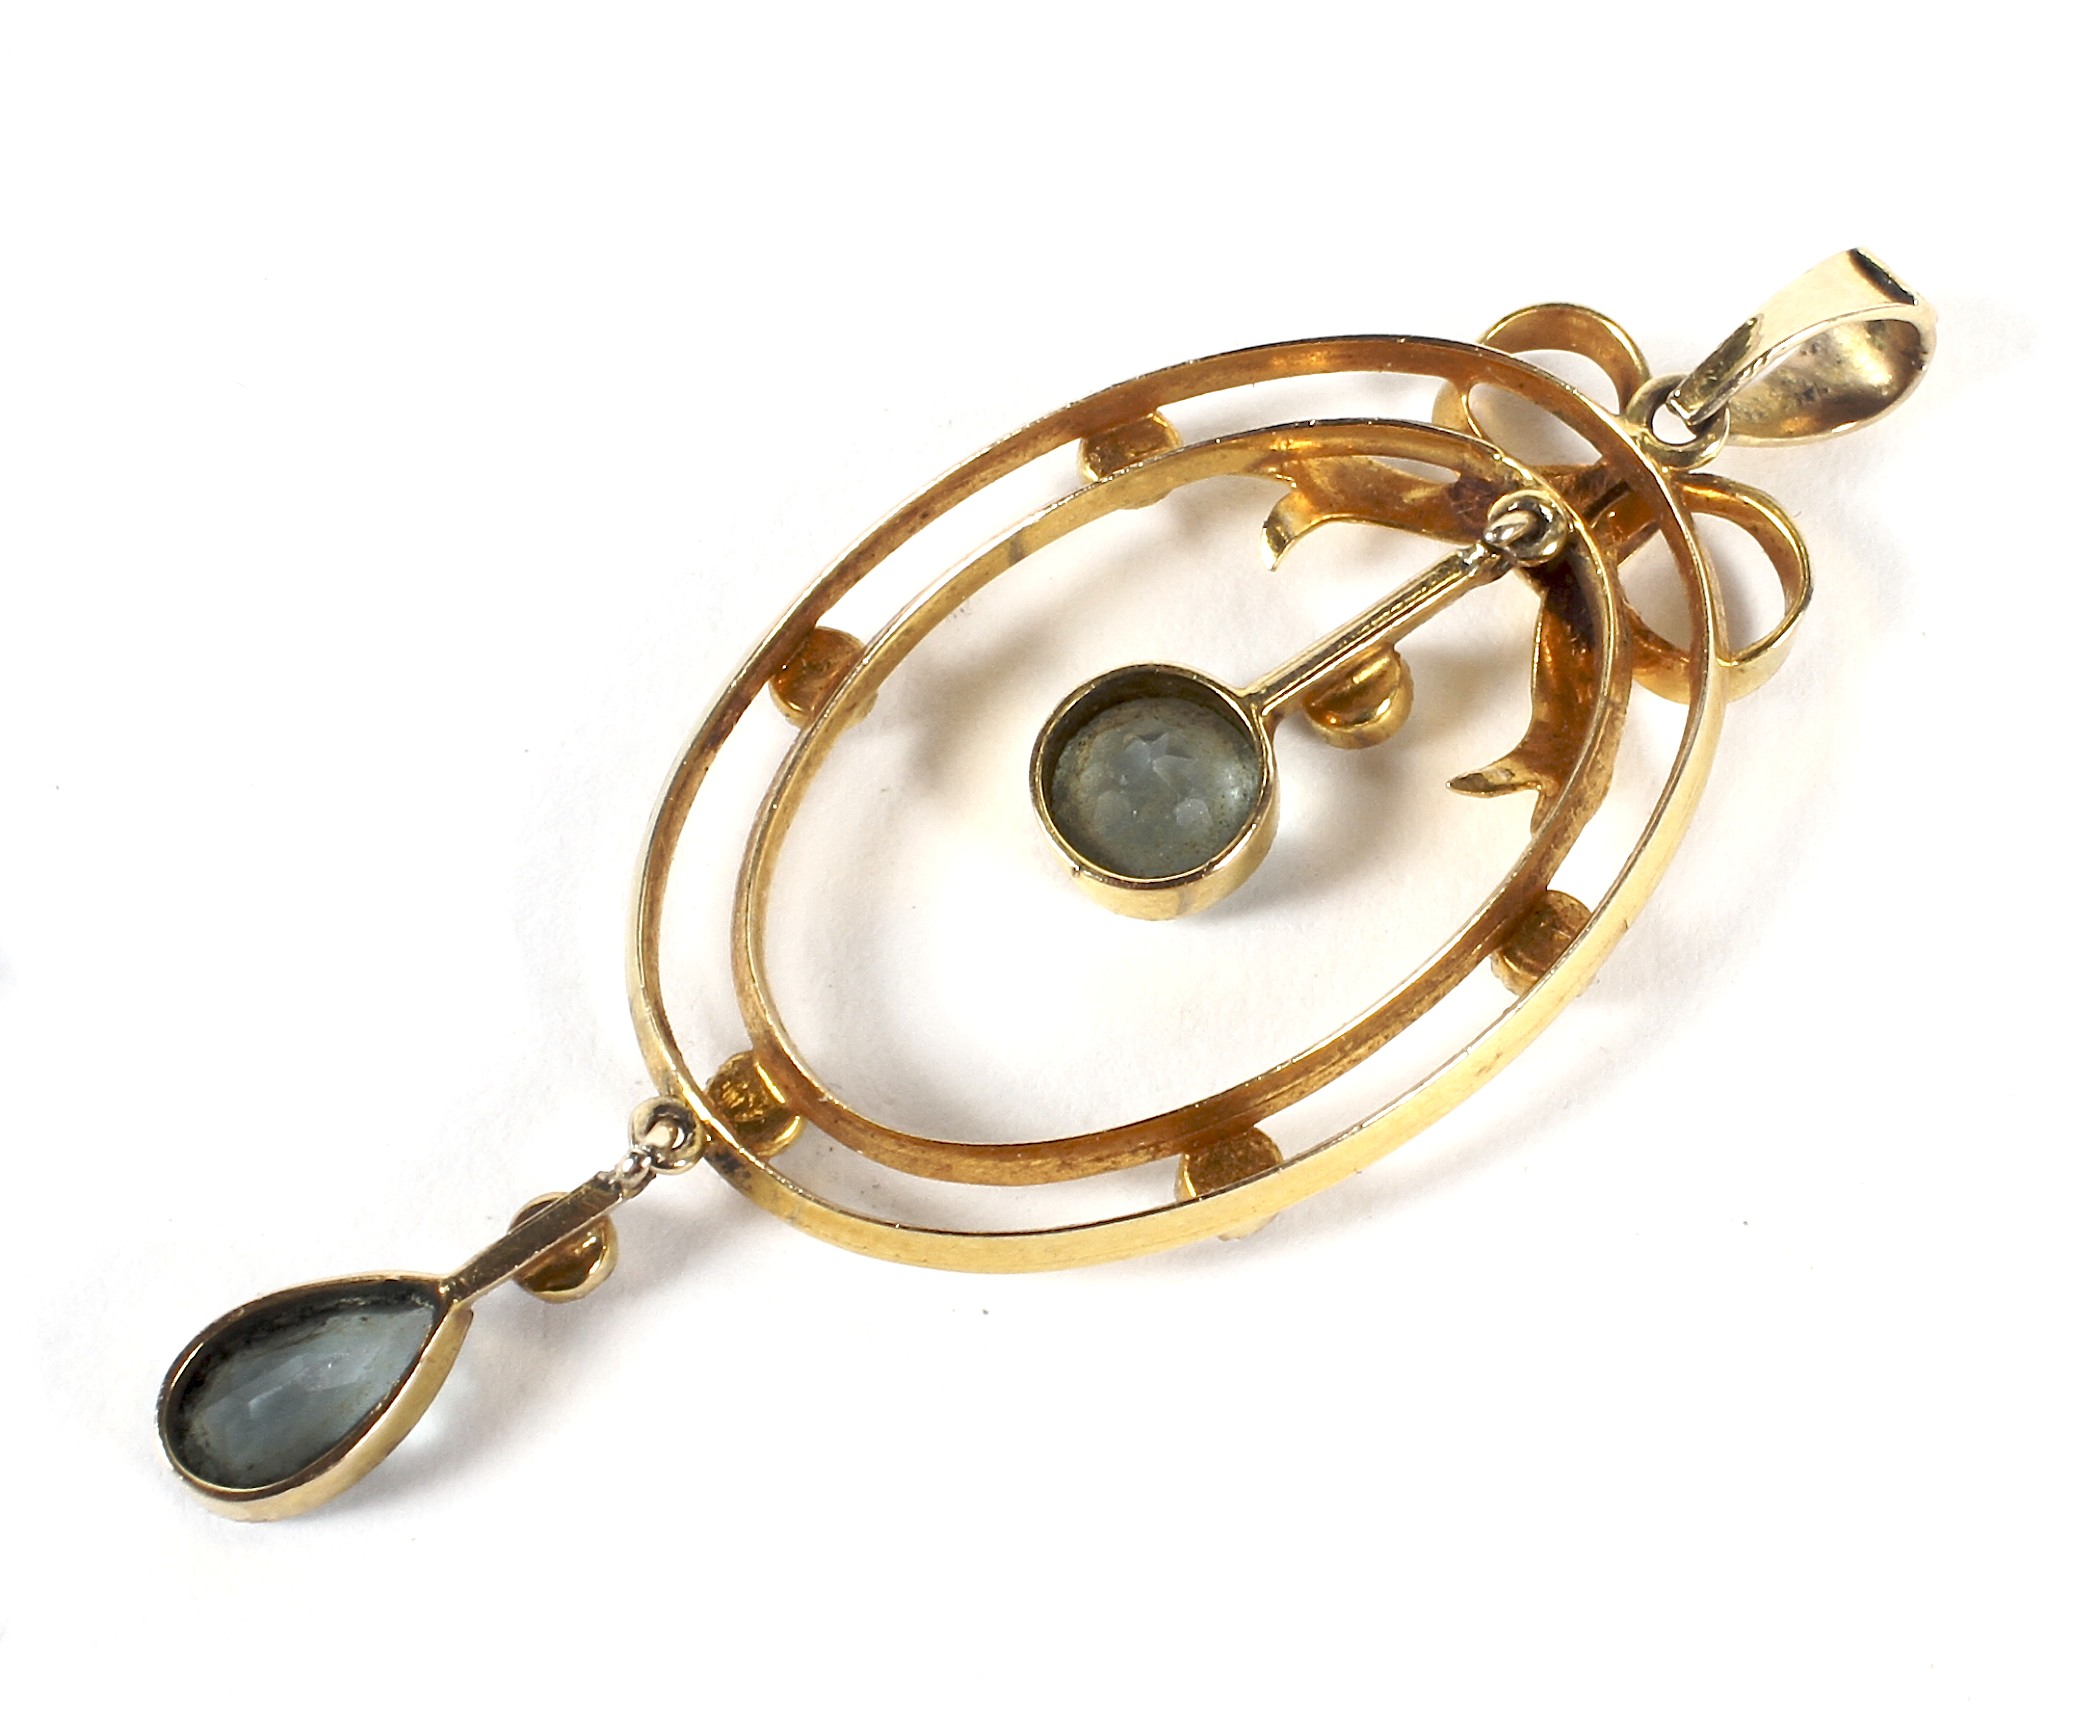 An Edwardian 9ct gold pendant, open oval design with a bow, - Image 2 of 3